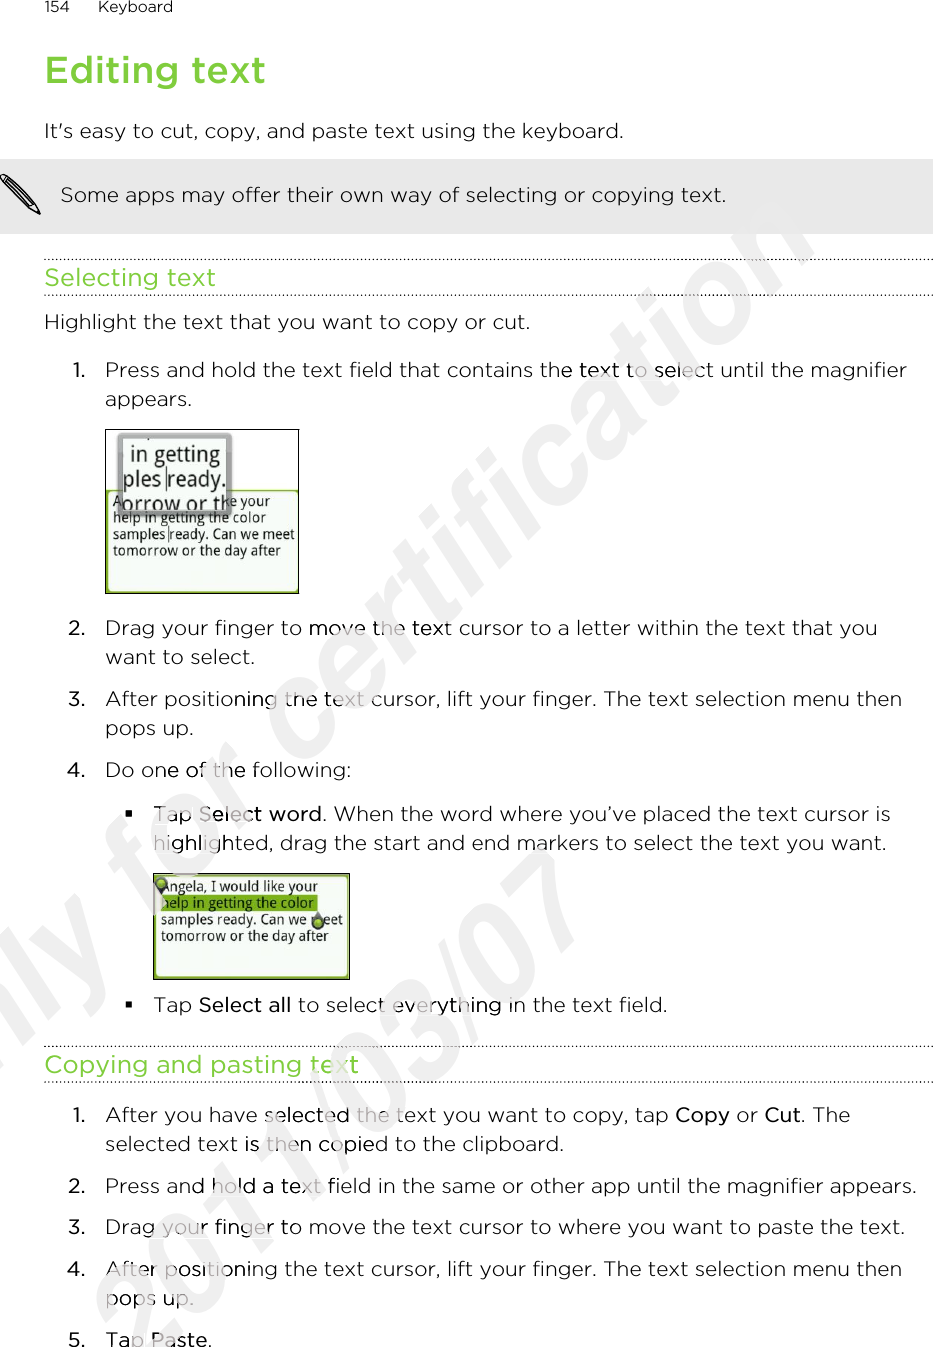 Editing textIt&apos;s easy to cut, copy, and paste text using the keyboard.Some apps may offer their own way of selecting or copying text.Selecting textHighlight the text that you want to copy or cut.1. Press and hold the text field that contains the text to select until the magnifierappears. 2. Drag your finger to move the text cursor to a letter within the text that youwant to select.3. After positioning the text cursor, lift your finger. The text selection menu thenpops up.4. Do one of the following:§Tap Select word. When the word where you’ve placed the text cursor ishighlighted, drag the start and end markers to select the text you want.§Tap Select all to select everything in the text field.Copying and pasting text1. After you have selected the text you want to copy, tap Copy or Cut. Theselected text is then copied to the clipboard.2. Press and hold a text field in the same or other app until the magnifier appears.3. Drag your finger to move the text cursor to where you want to paste the text.4. After positioning the text cursor, lift your finger. The text selection menu thenpops up.5. Tap Paste.154 KeyboardOnly Copying and pasting textOnly Copying and pasting textOnly for Do one of the following:for Do one of the following:§for §Tap for Tap Select wordfor Select wordhighlighted, drag the start and end markers to select the text you want.for highlighted, drag the start and end markers to select the text you want.for for for certification certification certification certification Press and hold the text field that contains the text to select until the magnifiercertification Press and hold the text field that contains the text to select until the magnifierDrag your finger to move the text cursor to a letter within the text that youcertification Drag your finger to move the text cursor to a letter within the text that youAfter positioning the text cursor, lift your finger. The text selection menu thencertification After positioning the text cursor, lift your finger. The text selection menu thenDo one of the following:certification Do one of the following:2011/03/07highlighted, drag the start and end markers to select the text you want.2011/03/07highlighted, drag the start and end markers to select the text you want. to select everything in the text field.2011/03/07 to select everything in the text field.Copying and pasting text2011/03/07Copying and pasting text2011/03/072011/03/072011/03/07After you have selected the text you want to copy, tap 2011/03/07After you have selected the text you want to copy, tap selected text is then copied to the clipboard.2011/03/07selected text is then copied to the clipboard.Press and hold a text field in the same or other app until the magnifier appears.2011/03/07Press and hold a text field in the same or other app until the magnifier appears.Drag your finger to move the text cursor to where you want to paste the text.2011/03/07Drag your finger to move the text cursor to where you want to paste the text.After positioning the text cursor, lift your finger. The text selection menu then2011/03/07After positioning the text cursor, lift your finger. The text selection menu thenpops up.2011/03/07pops up.Tap 2011/03/07Tap Paste2011/03/07Paste